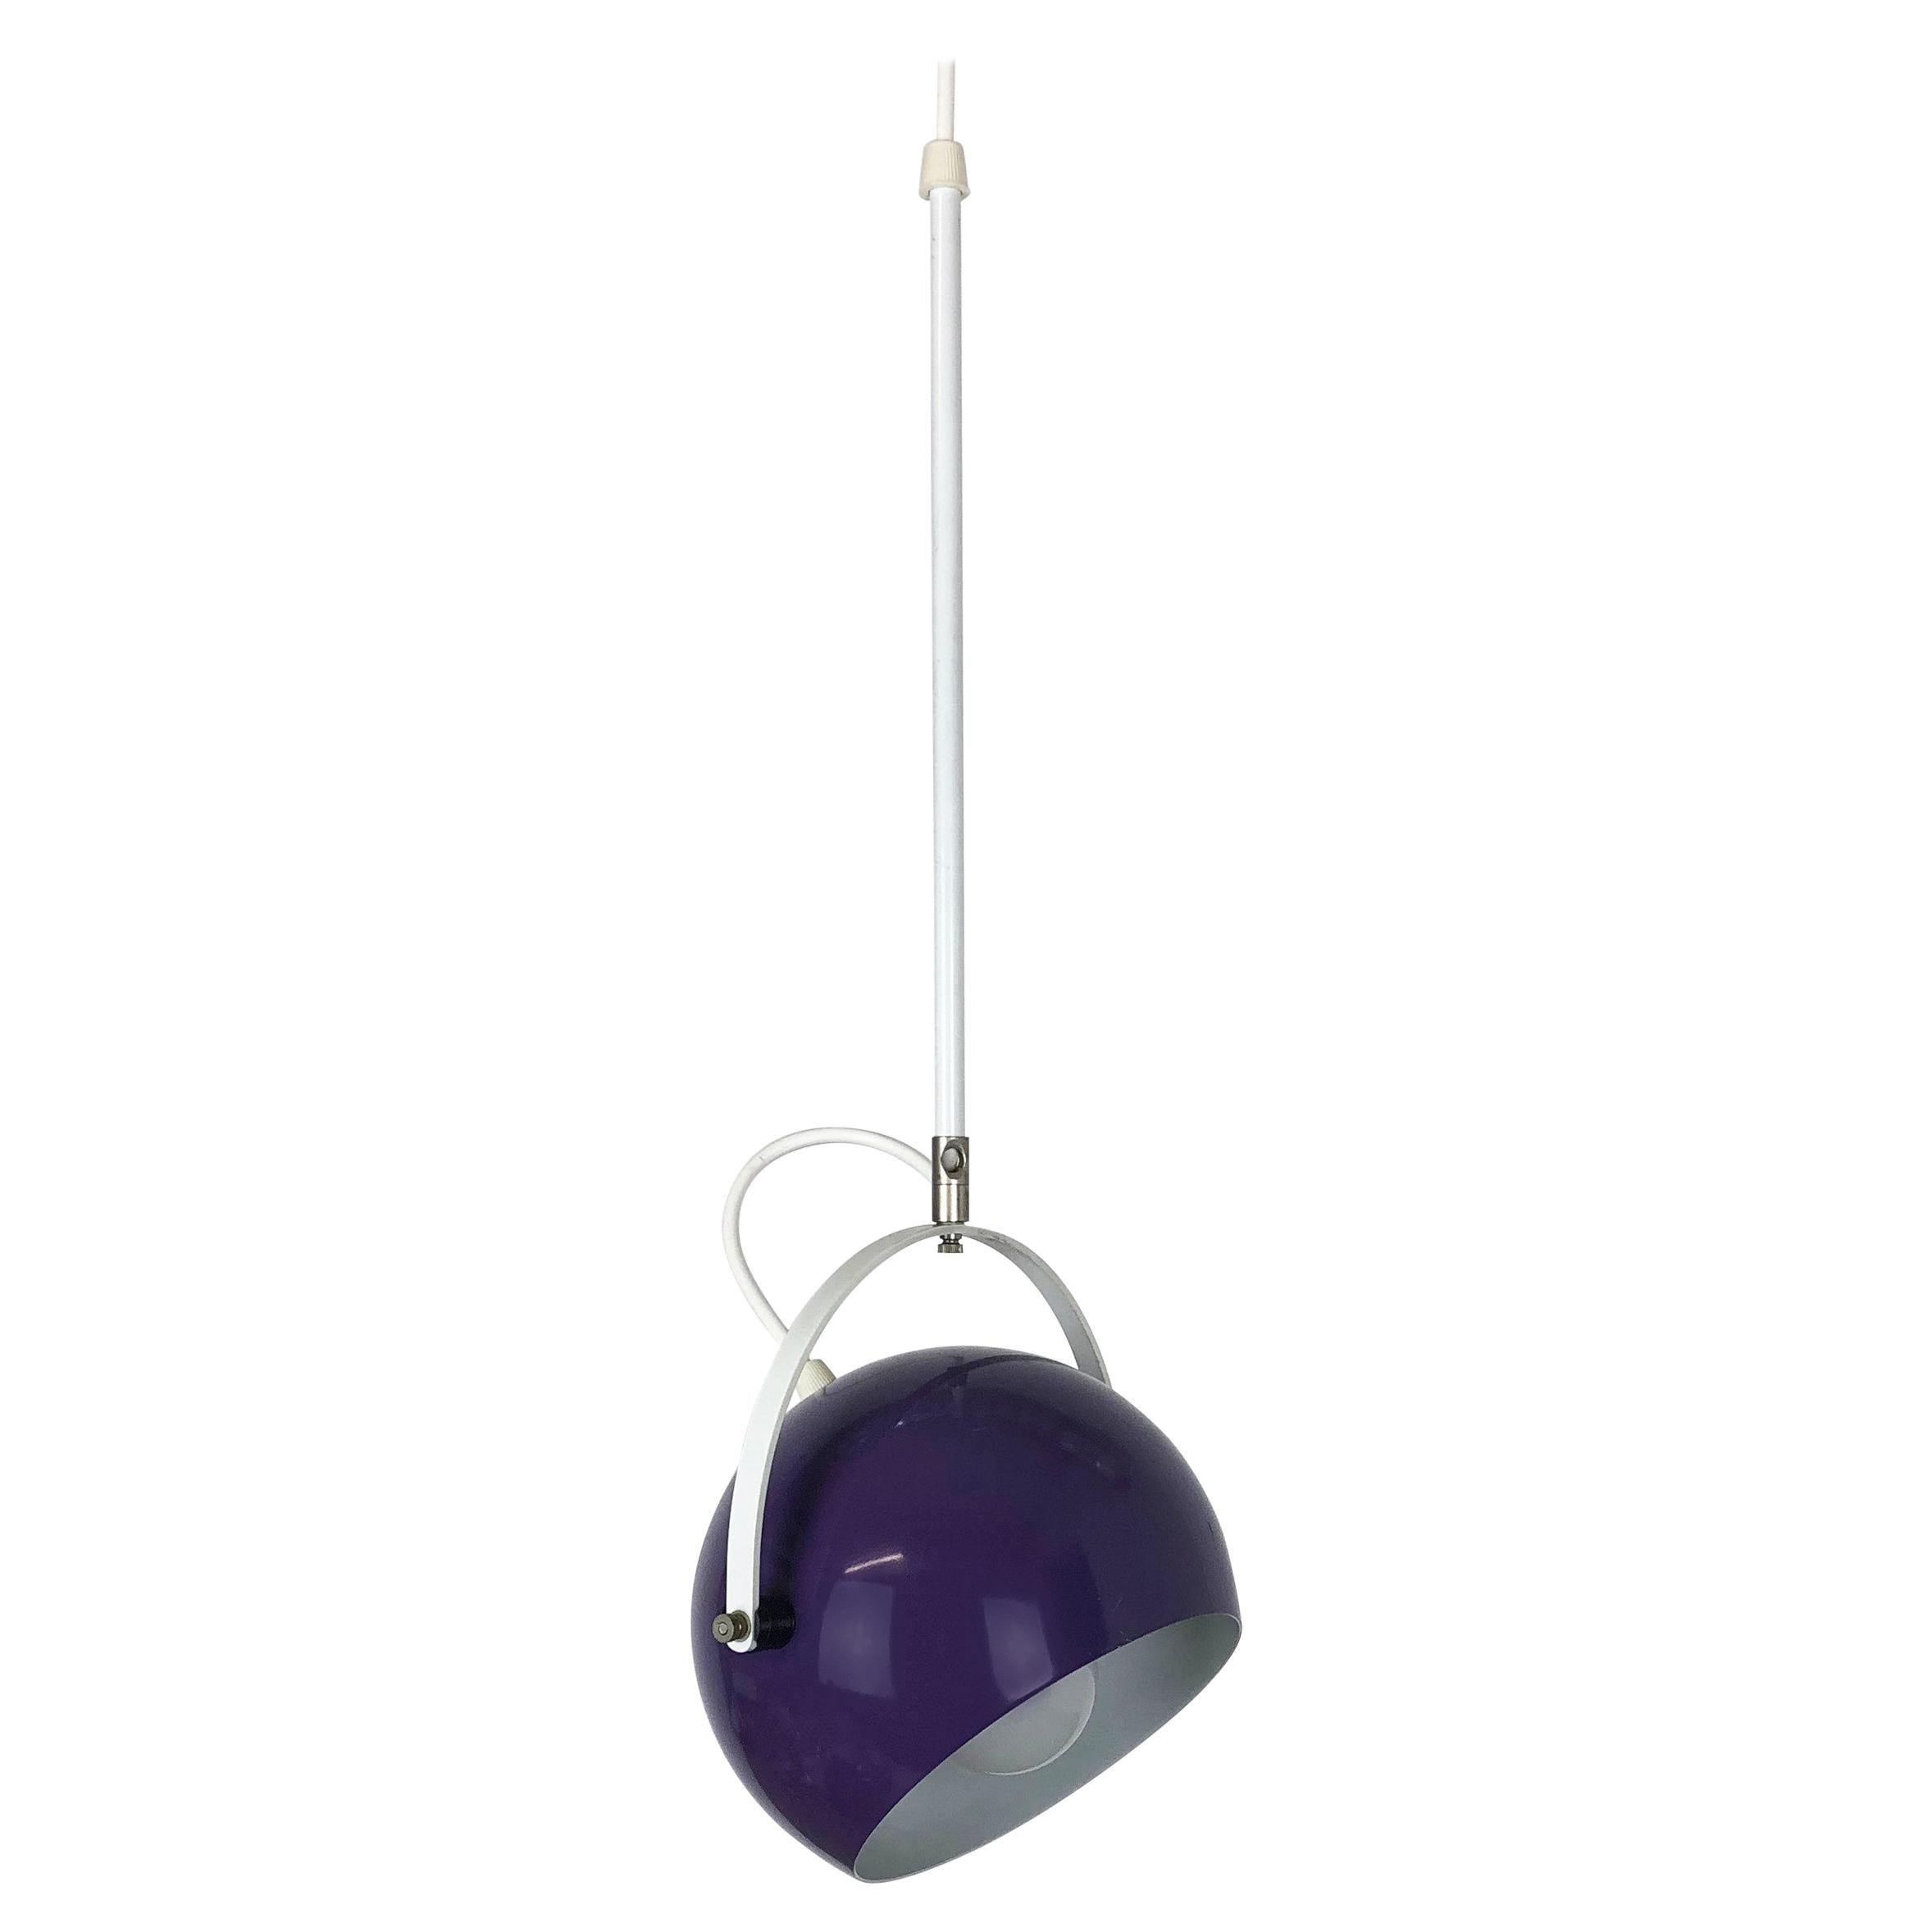 Adjustable Pop Art Panton Style Hanging Light with Purple Spot, Germany, 1970s For Sale